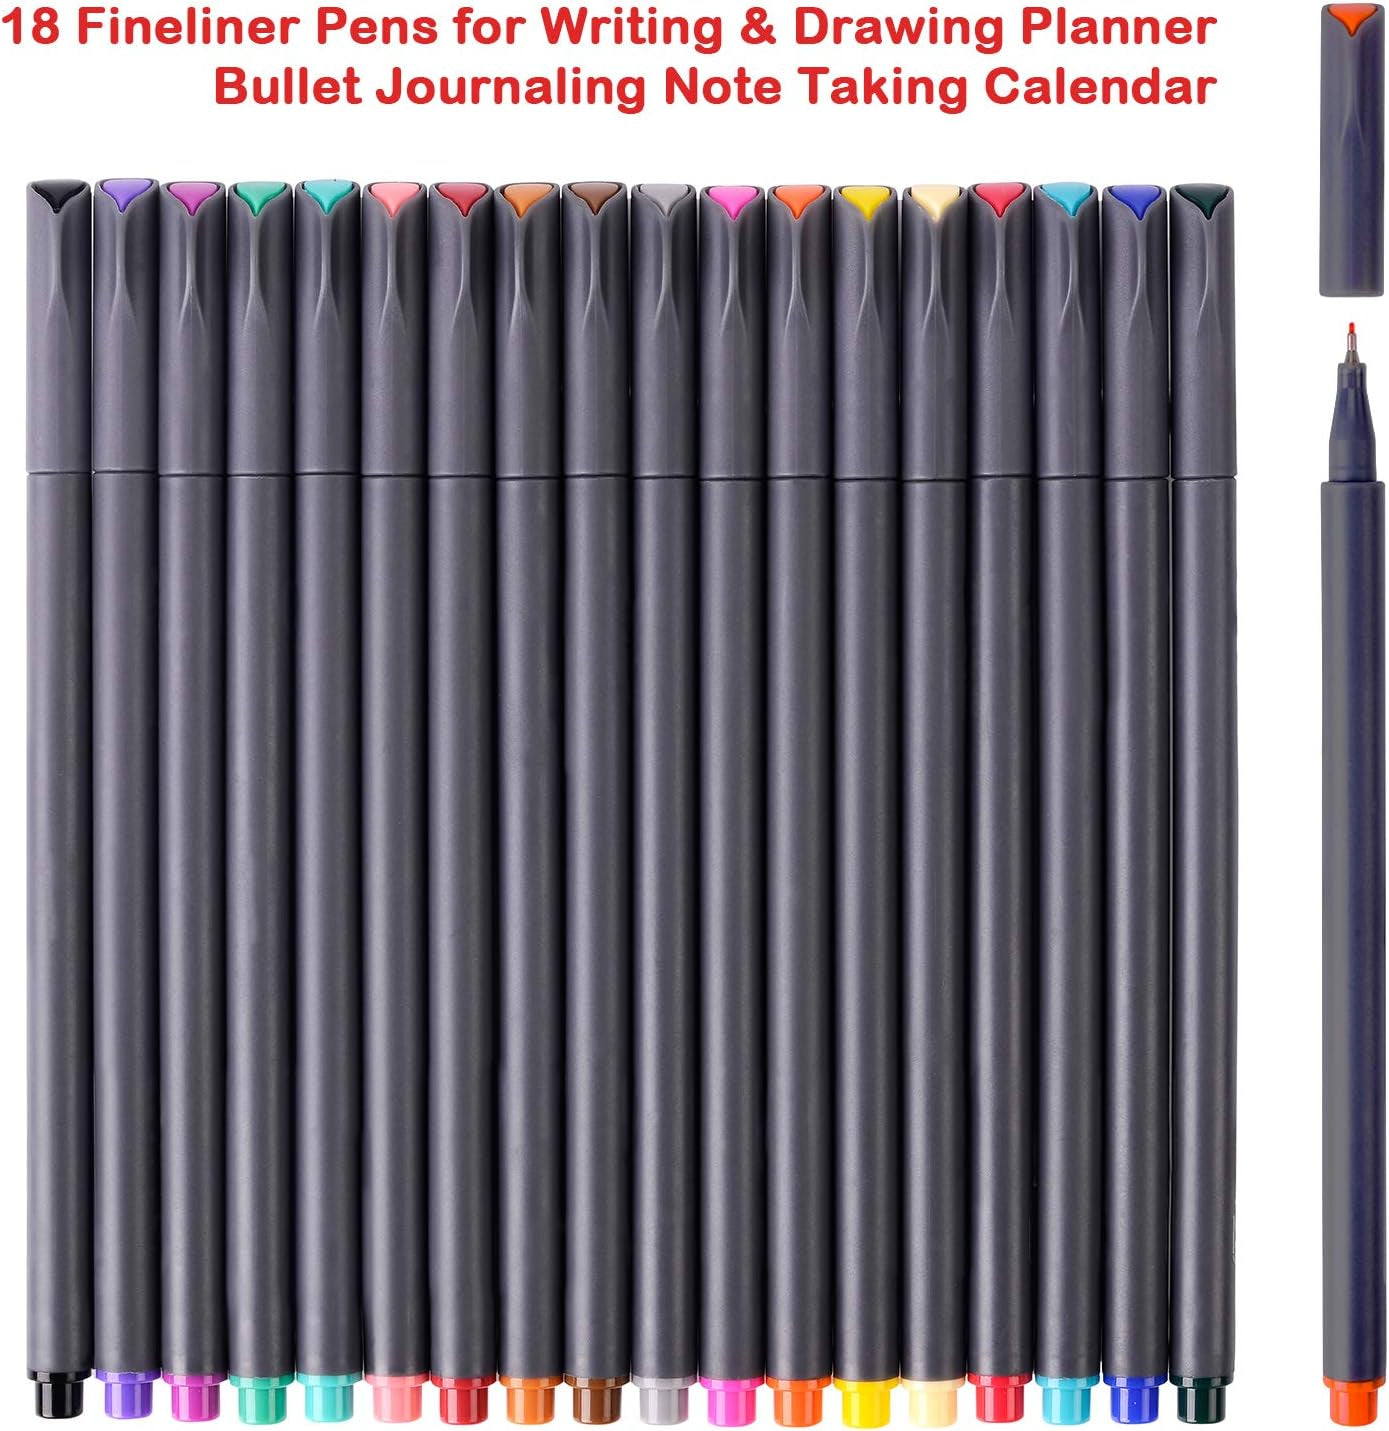 Journal Planner Pens Colored Pens Fine Point Markers Fine Tip Drawing Pens Fineliner Pen for Bullet Journaling Writing Note Taking Calendar Coloring Art Office School Supplies, 18-Pack